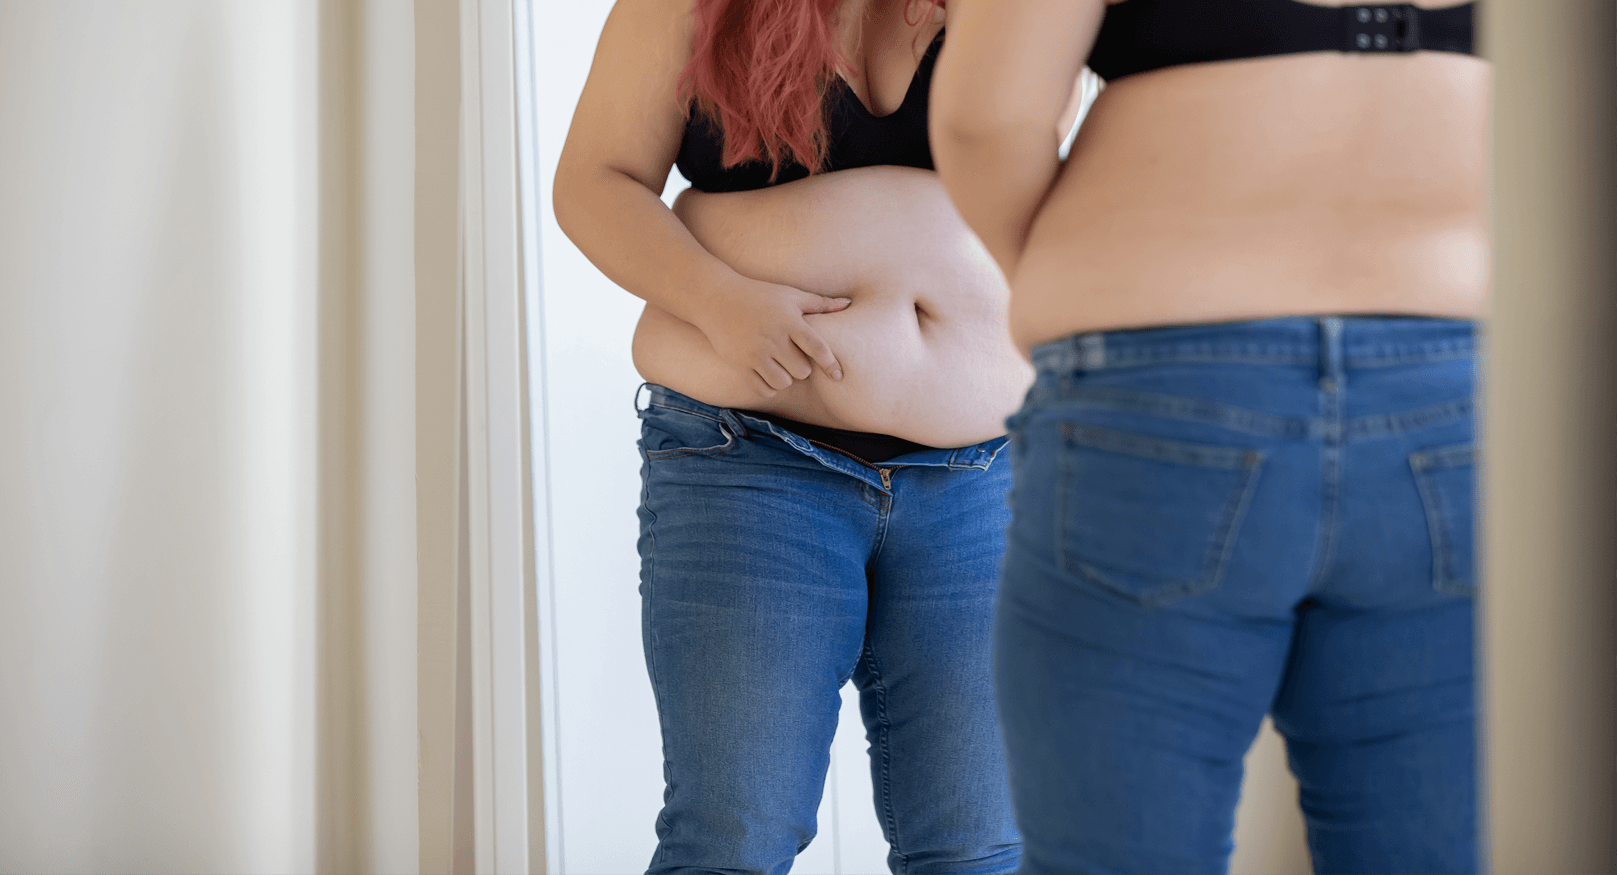 Weight Loss Surgery Eliminates Pre-Cancerous Uterine Growths